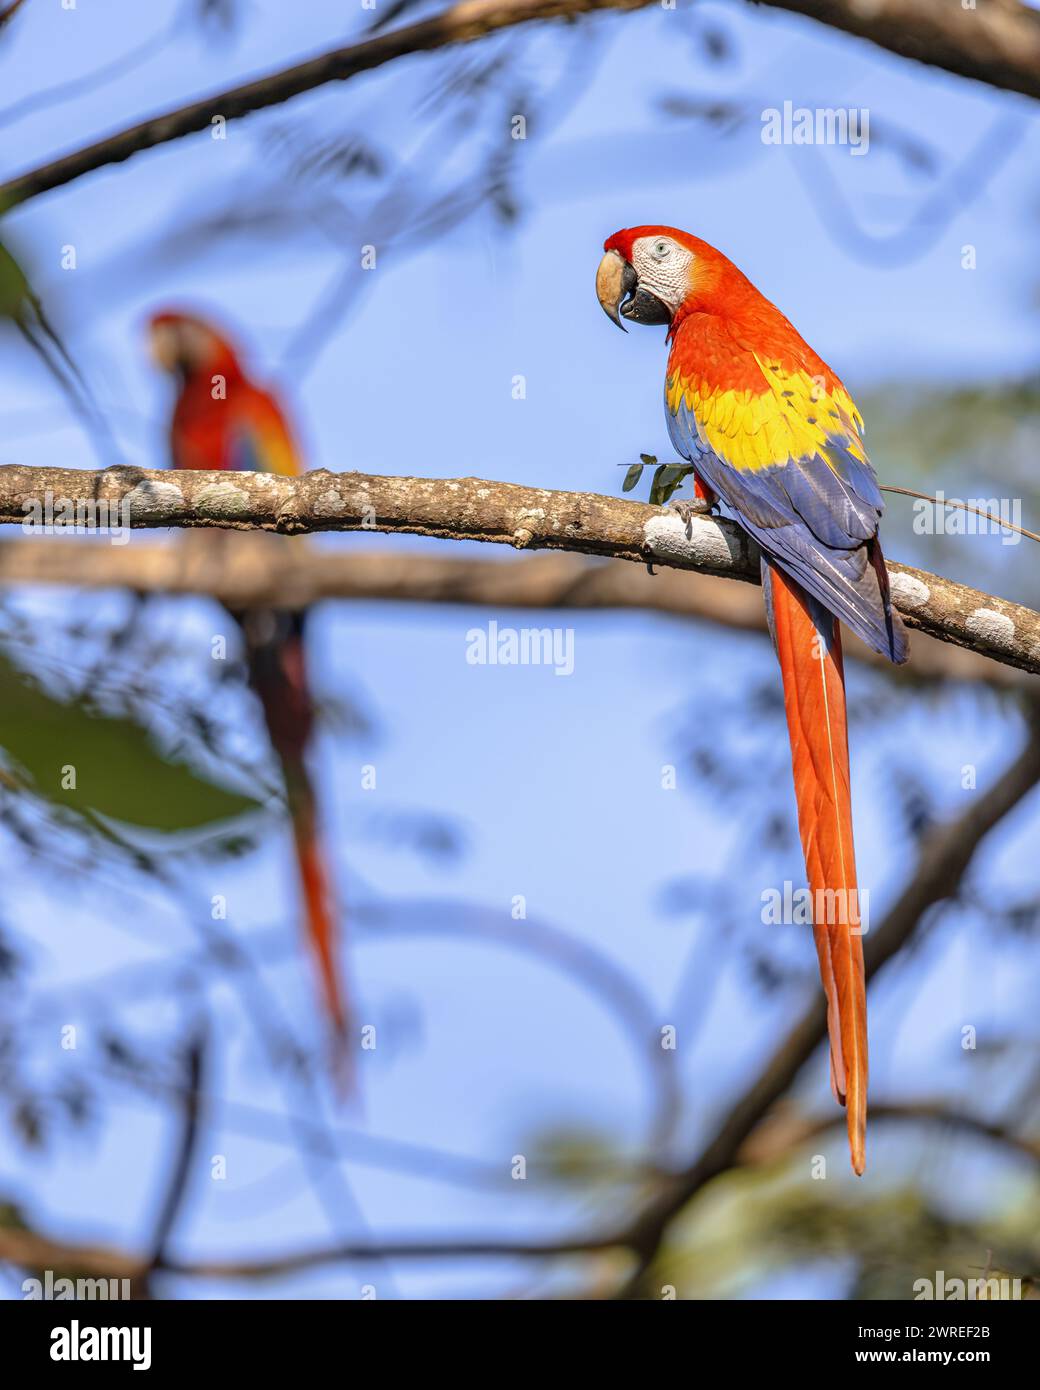 Scarlet macaw (Ara macao) is a large yellow, red and blue Neotropical parrot native to humid evergreen forests of the Americas. Pair in rainforest. Wi Stock Photo